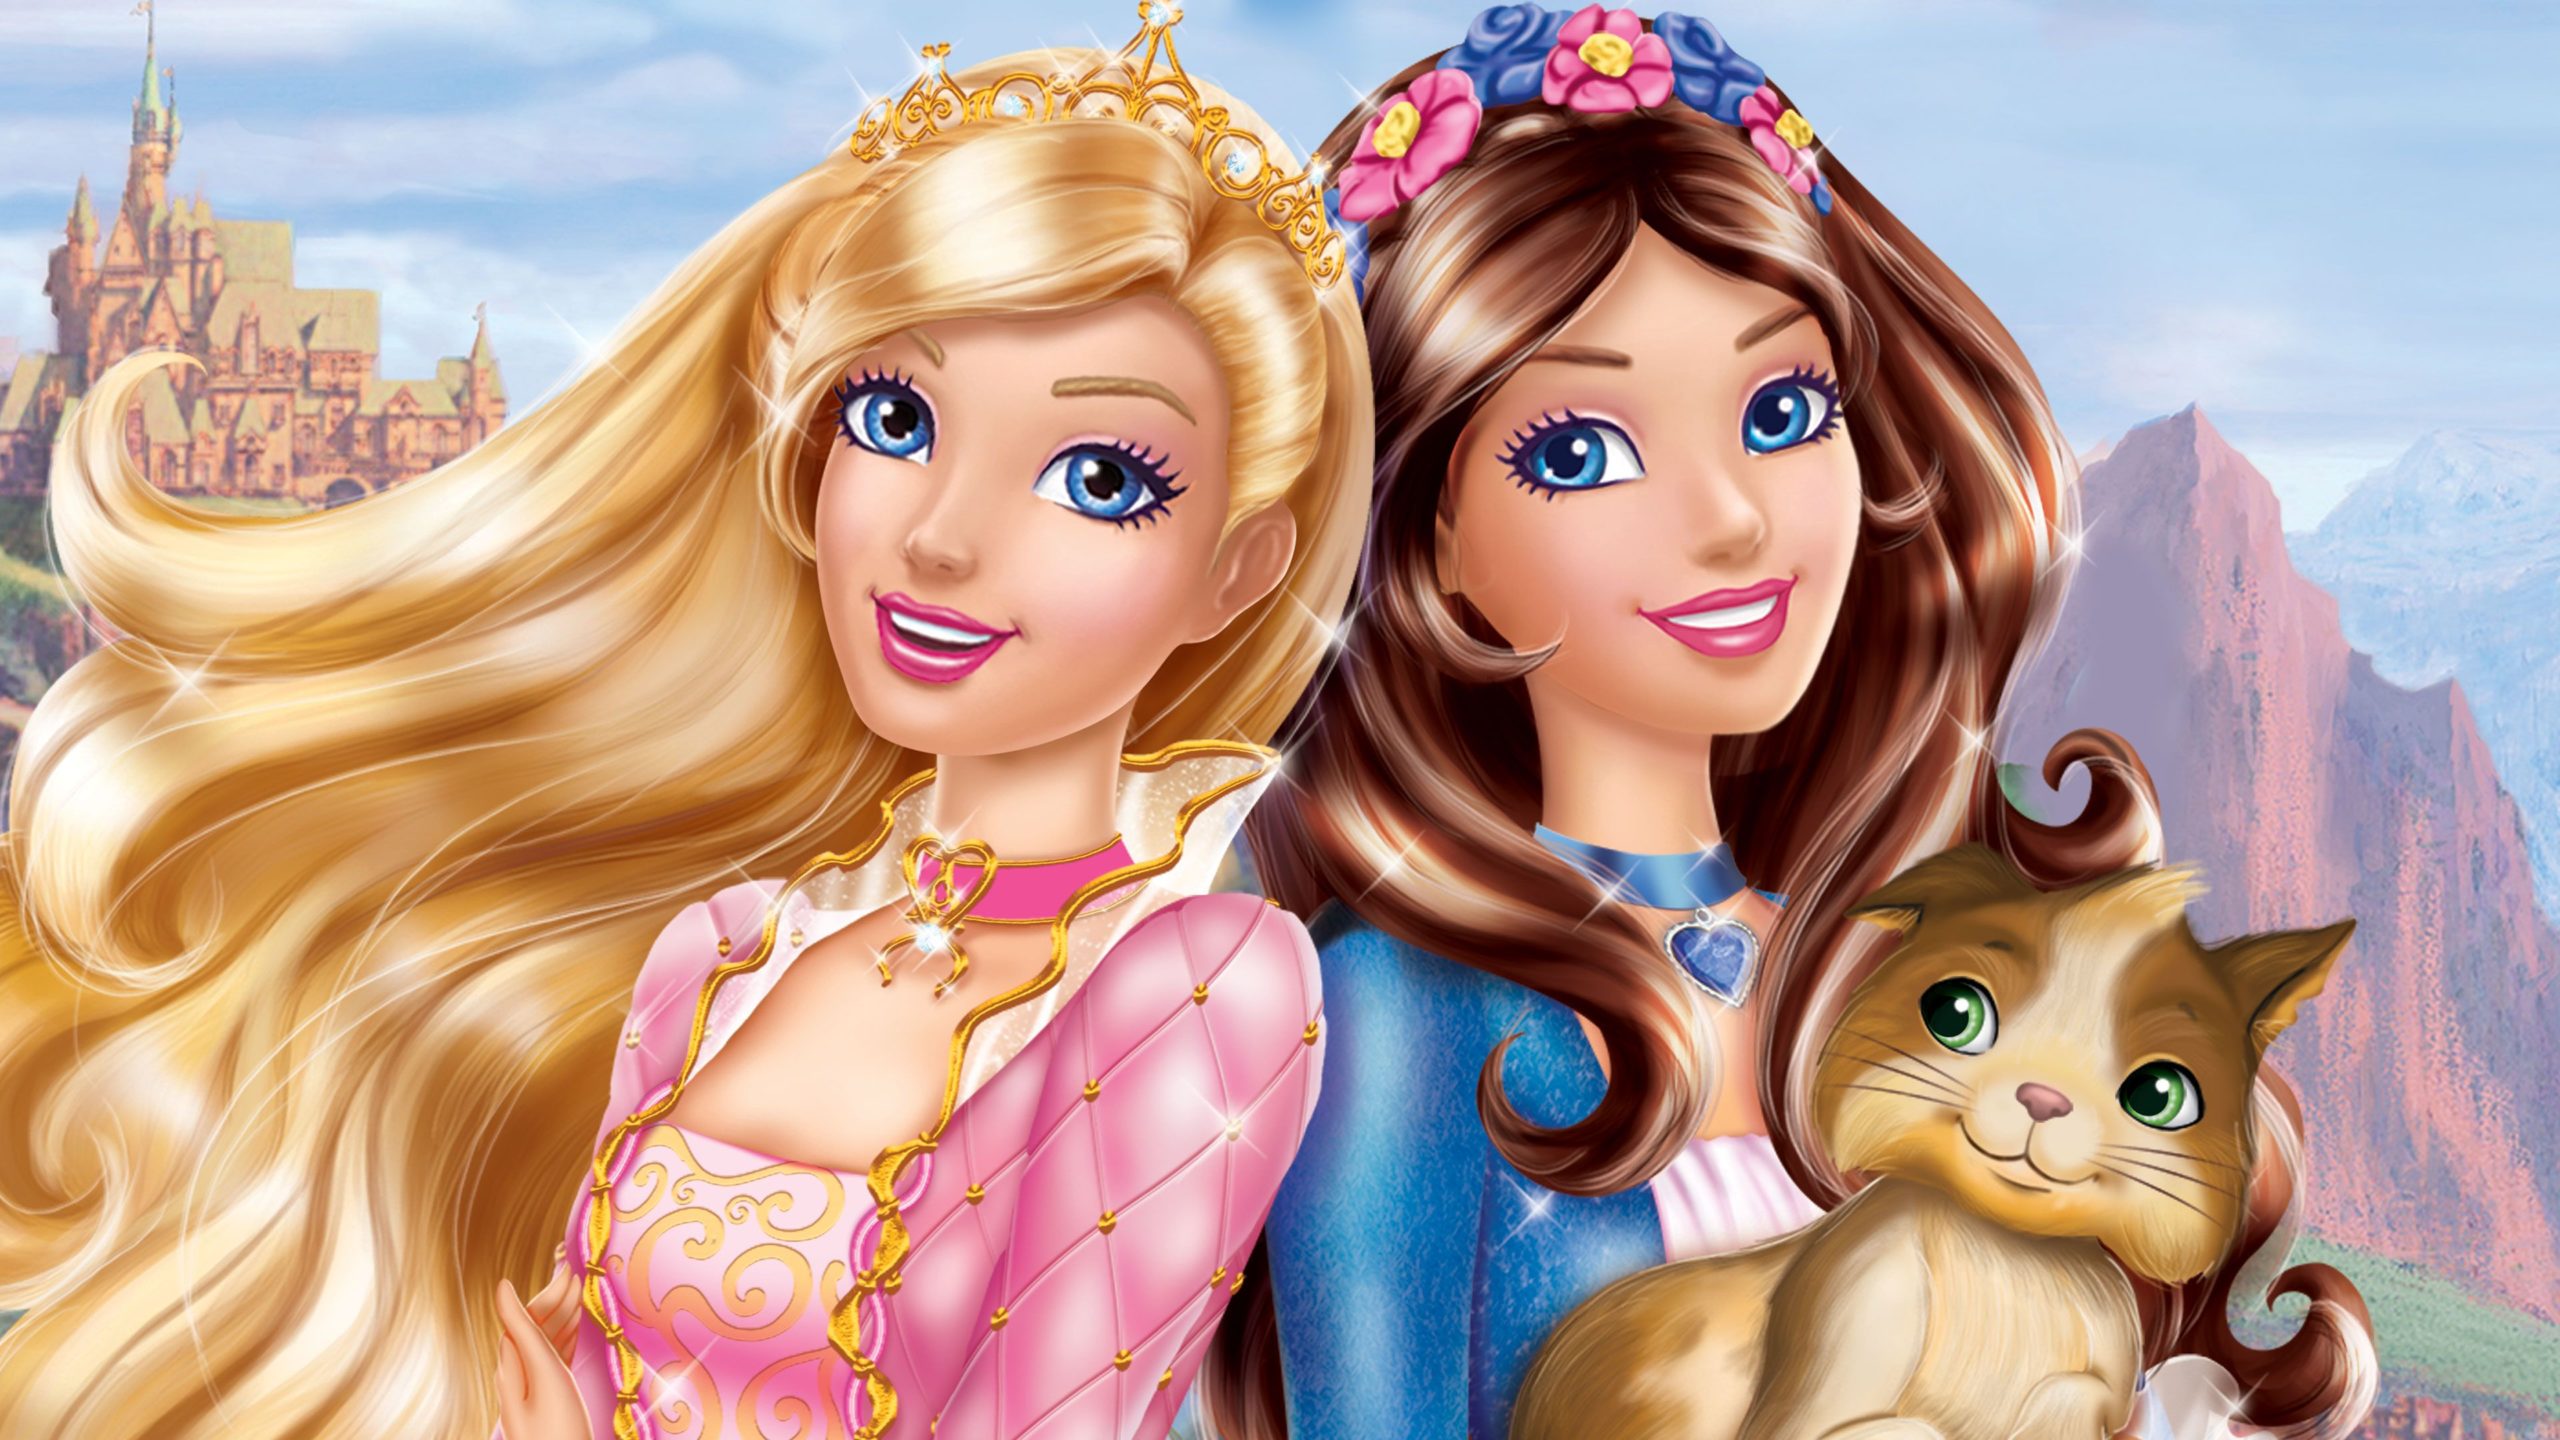 Barbie as The Princess and the Pauper